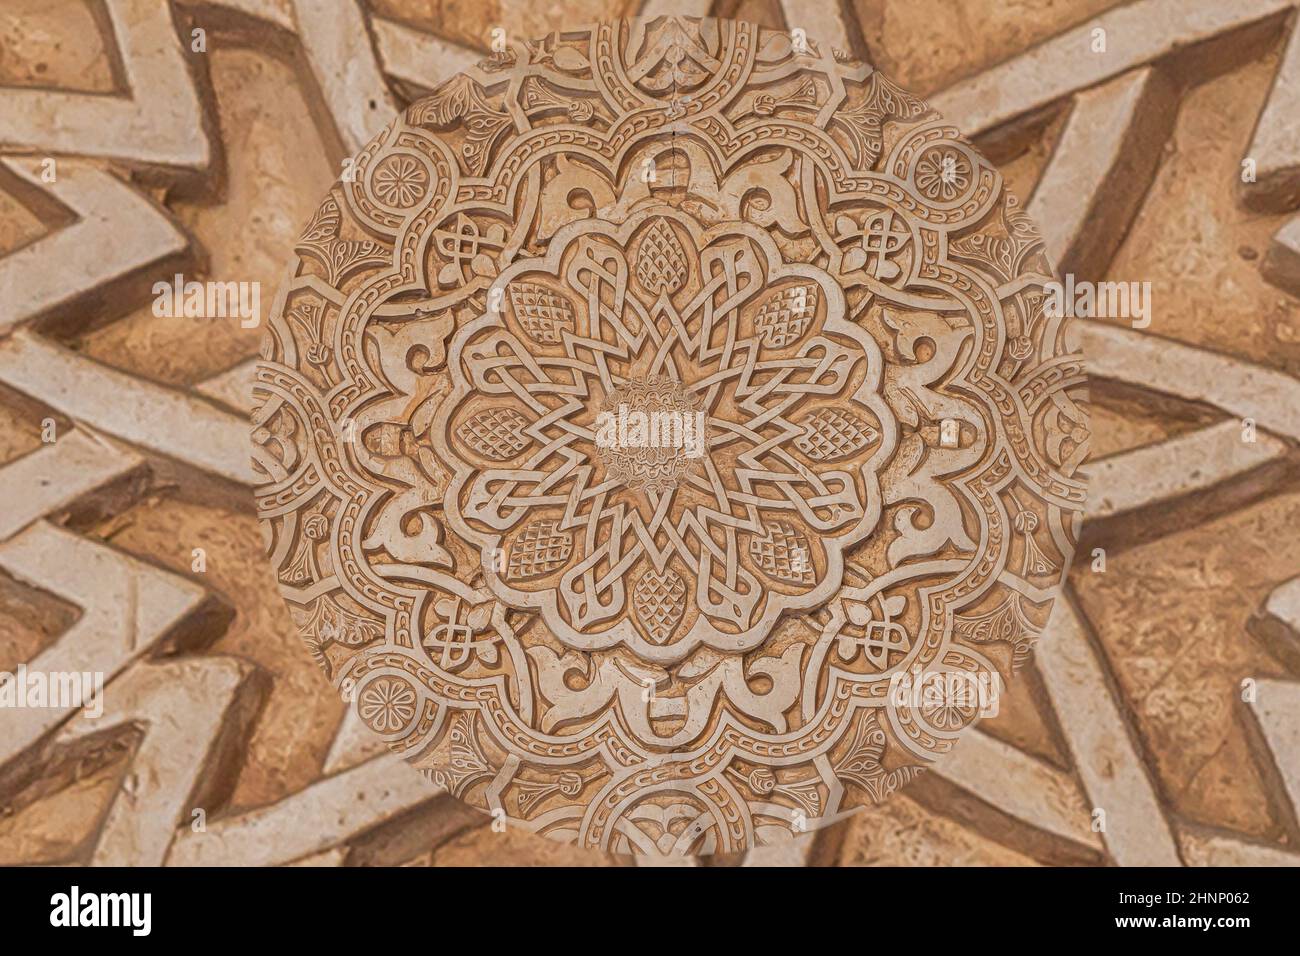 Arab background remanding to Islam culture. Design created using droste effect on a 13th century architectural detail in a mosque. Stock Photo